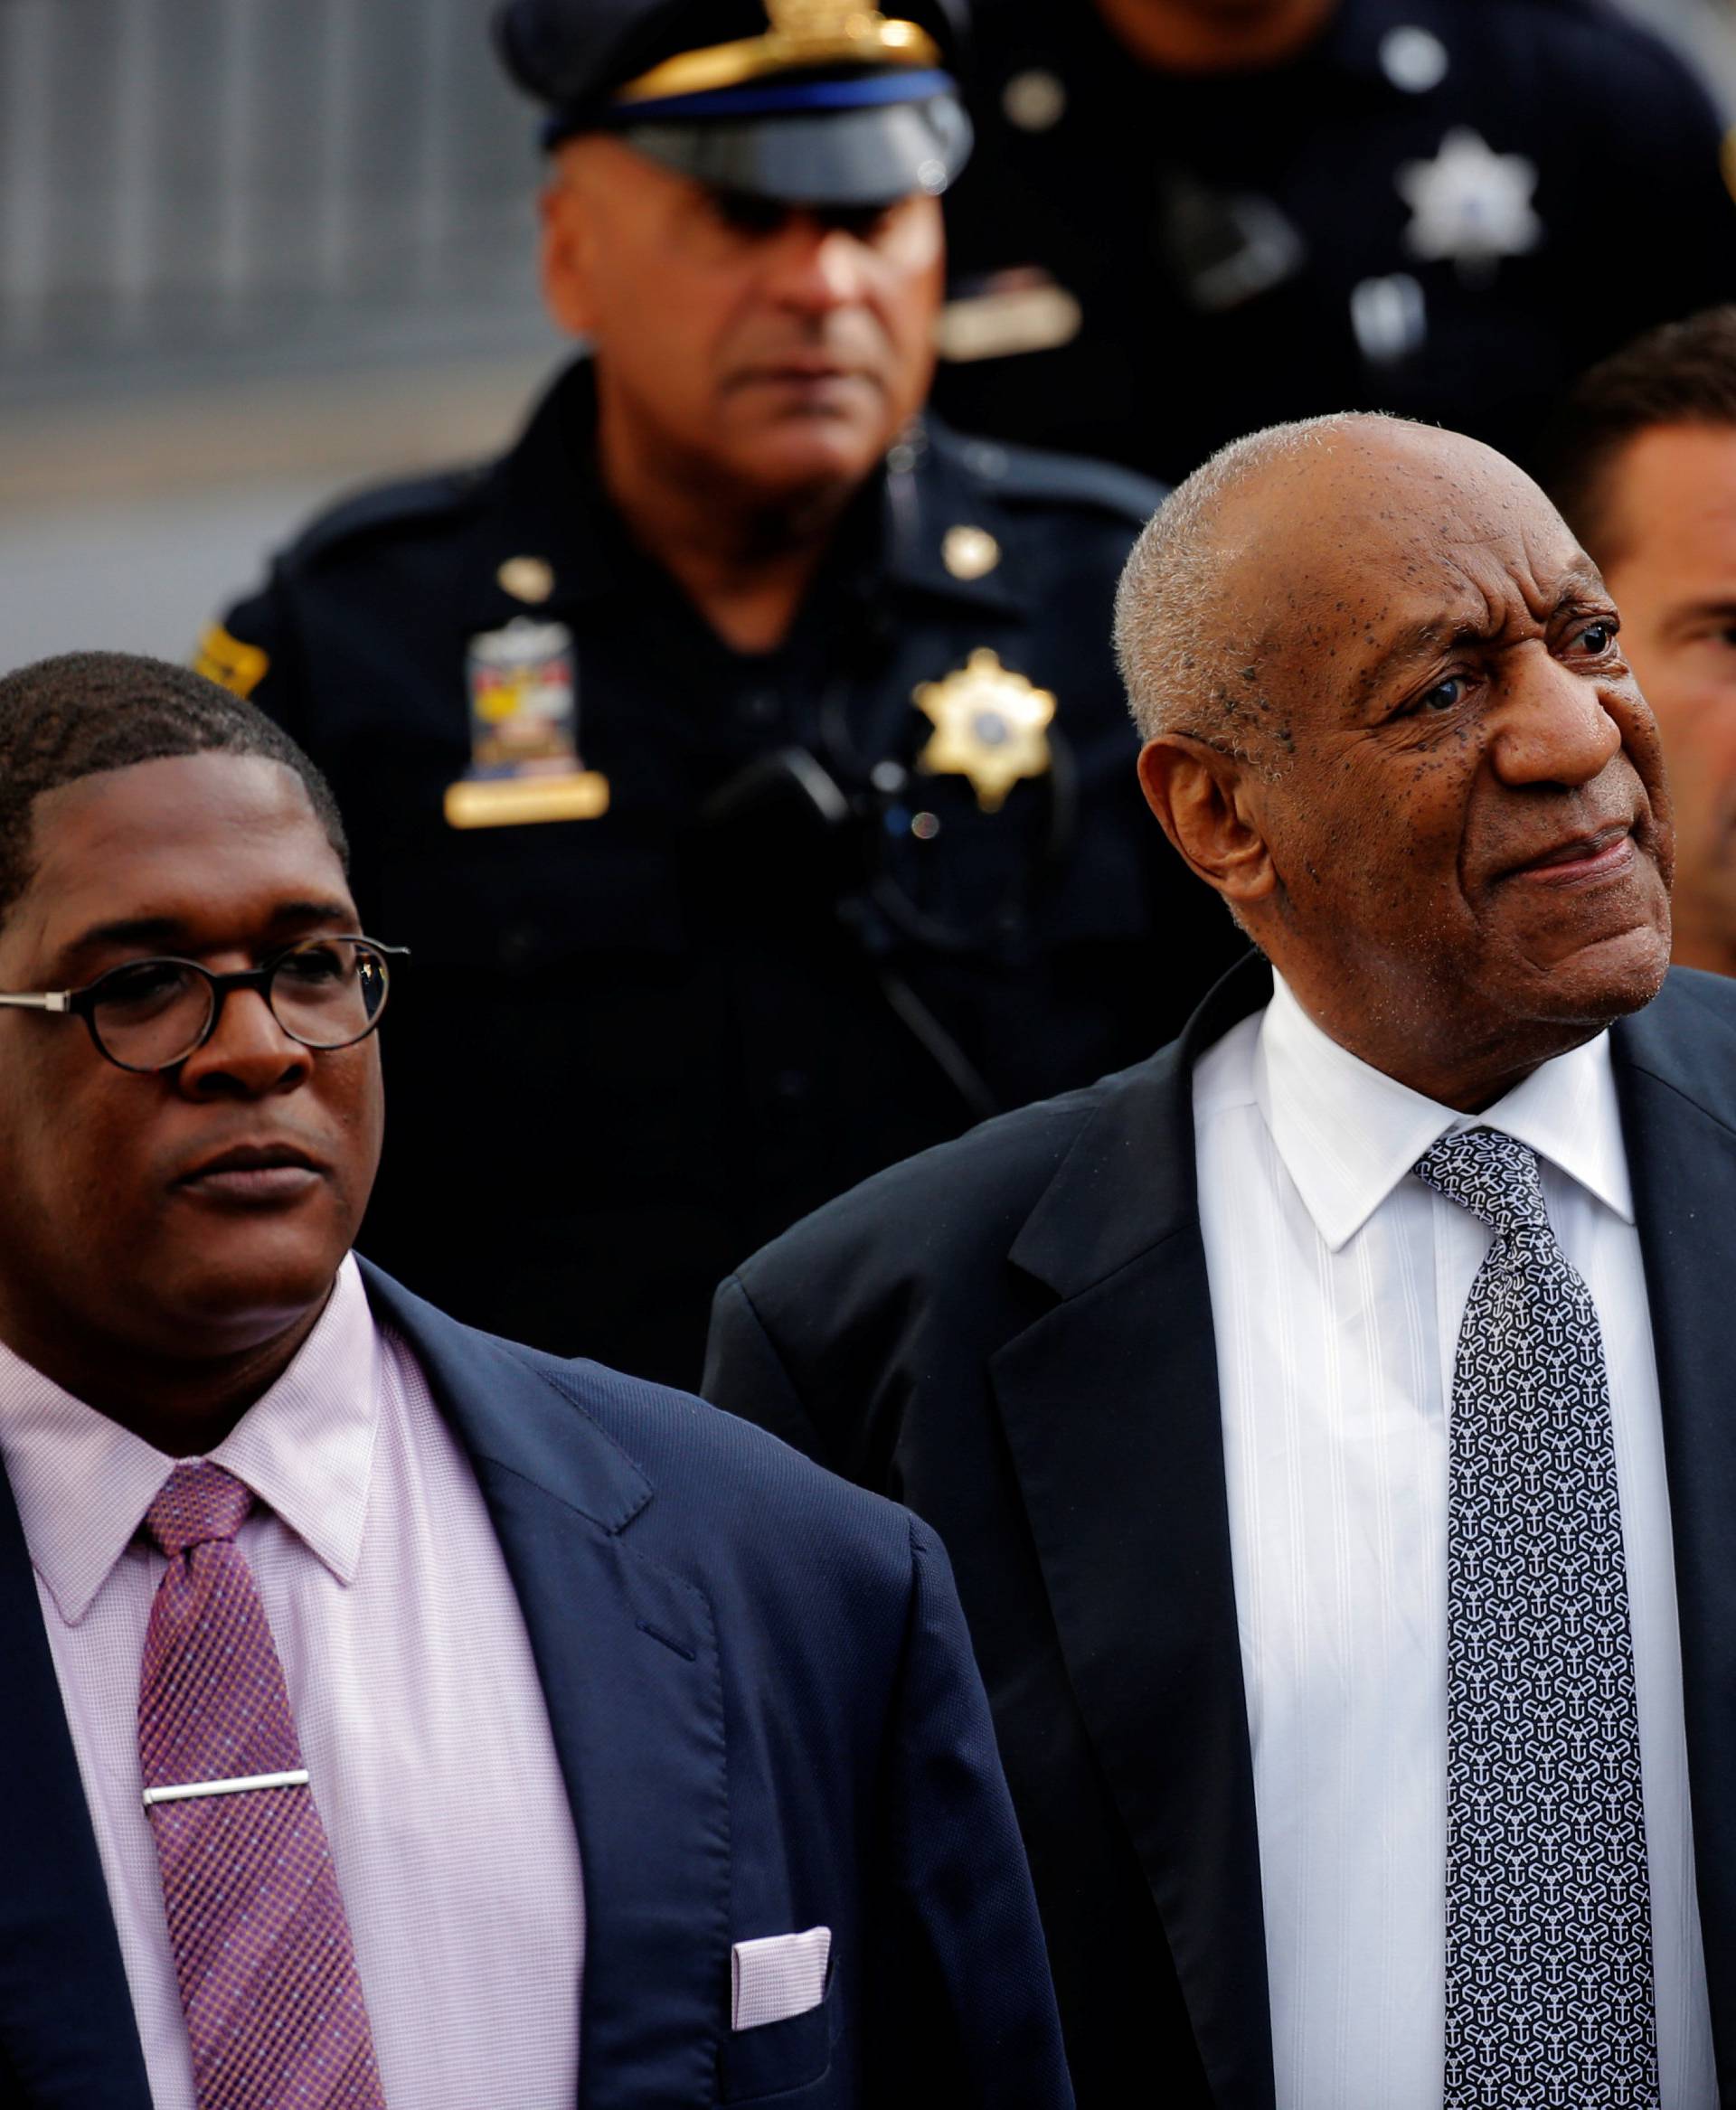 Actor and comedian Bill Cosby departs with comedian Joe Torry and publicist Andrew Wyatt after the fourth day of Cosby's sexual assault trial at the Montgomery County Courthouse in Norristown, Pennsylvania